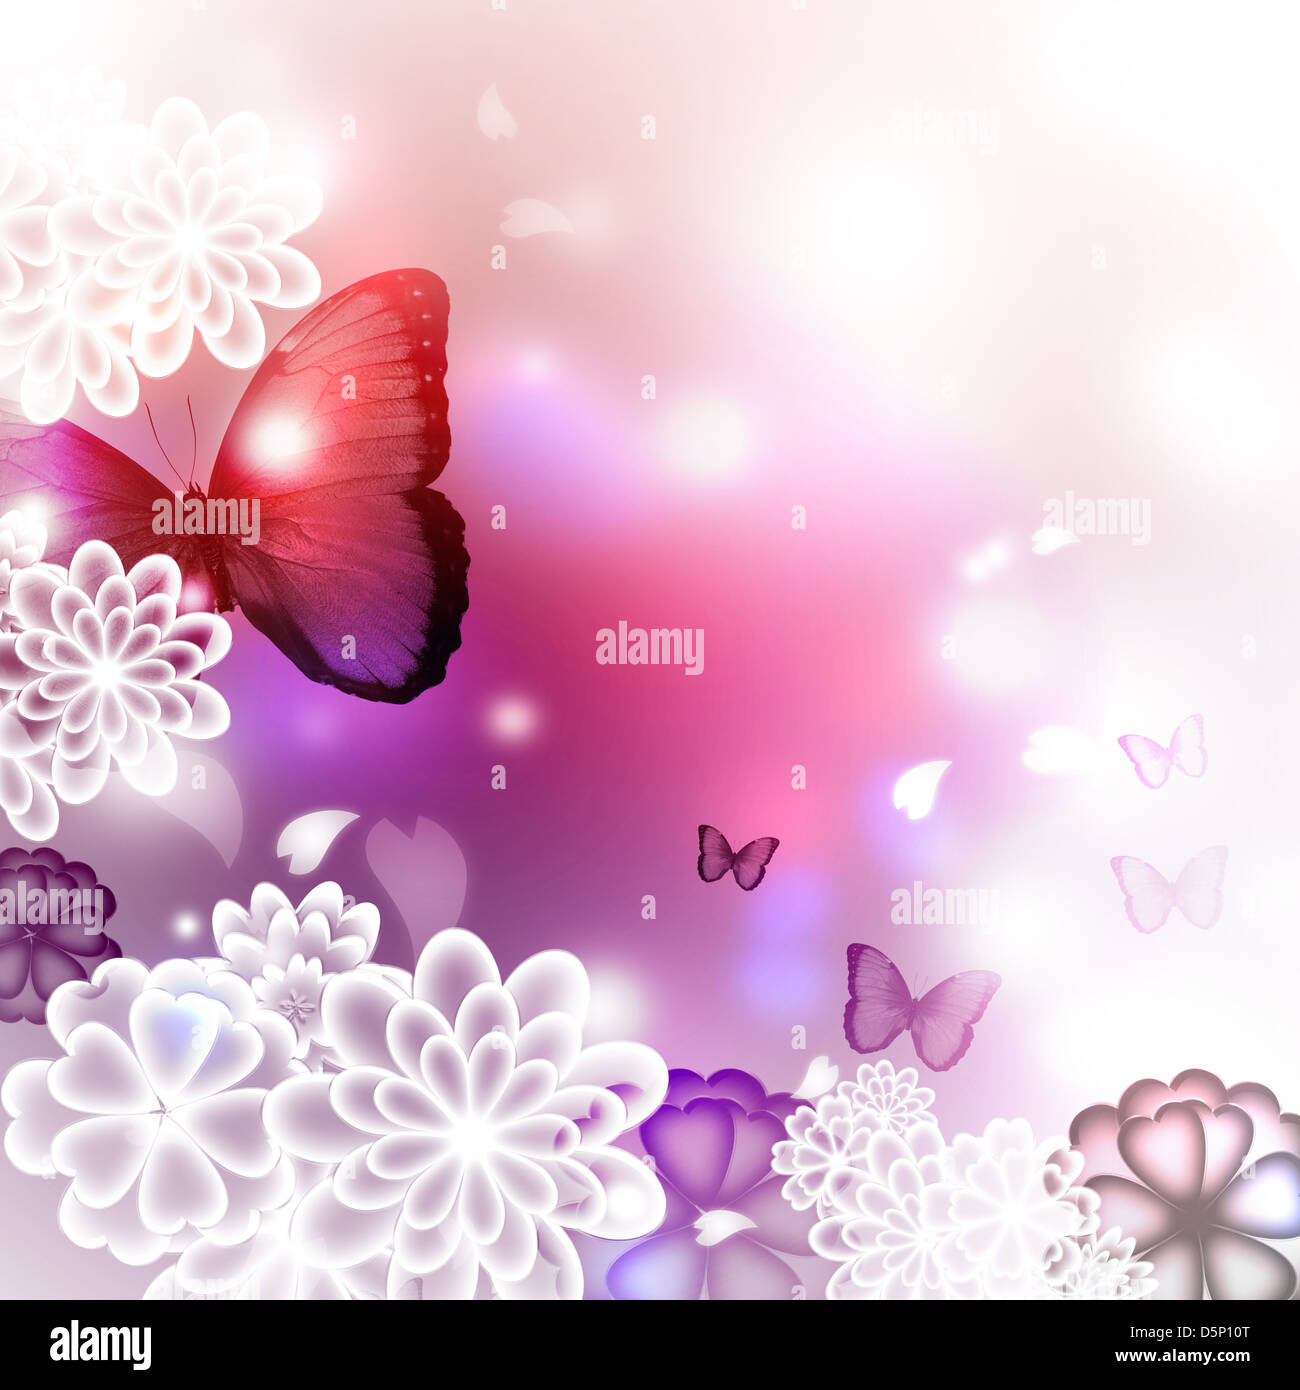 Blossoms and butterflies, pink and purple illustration Stock Photo